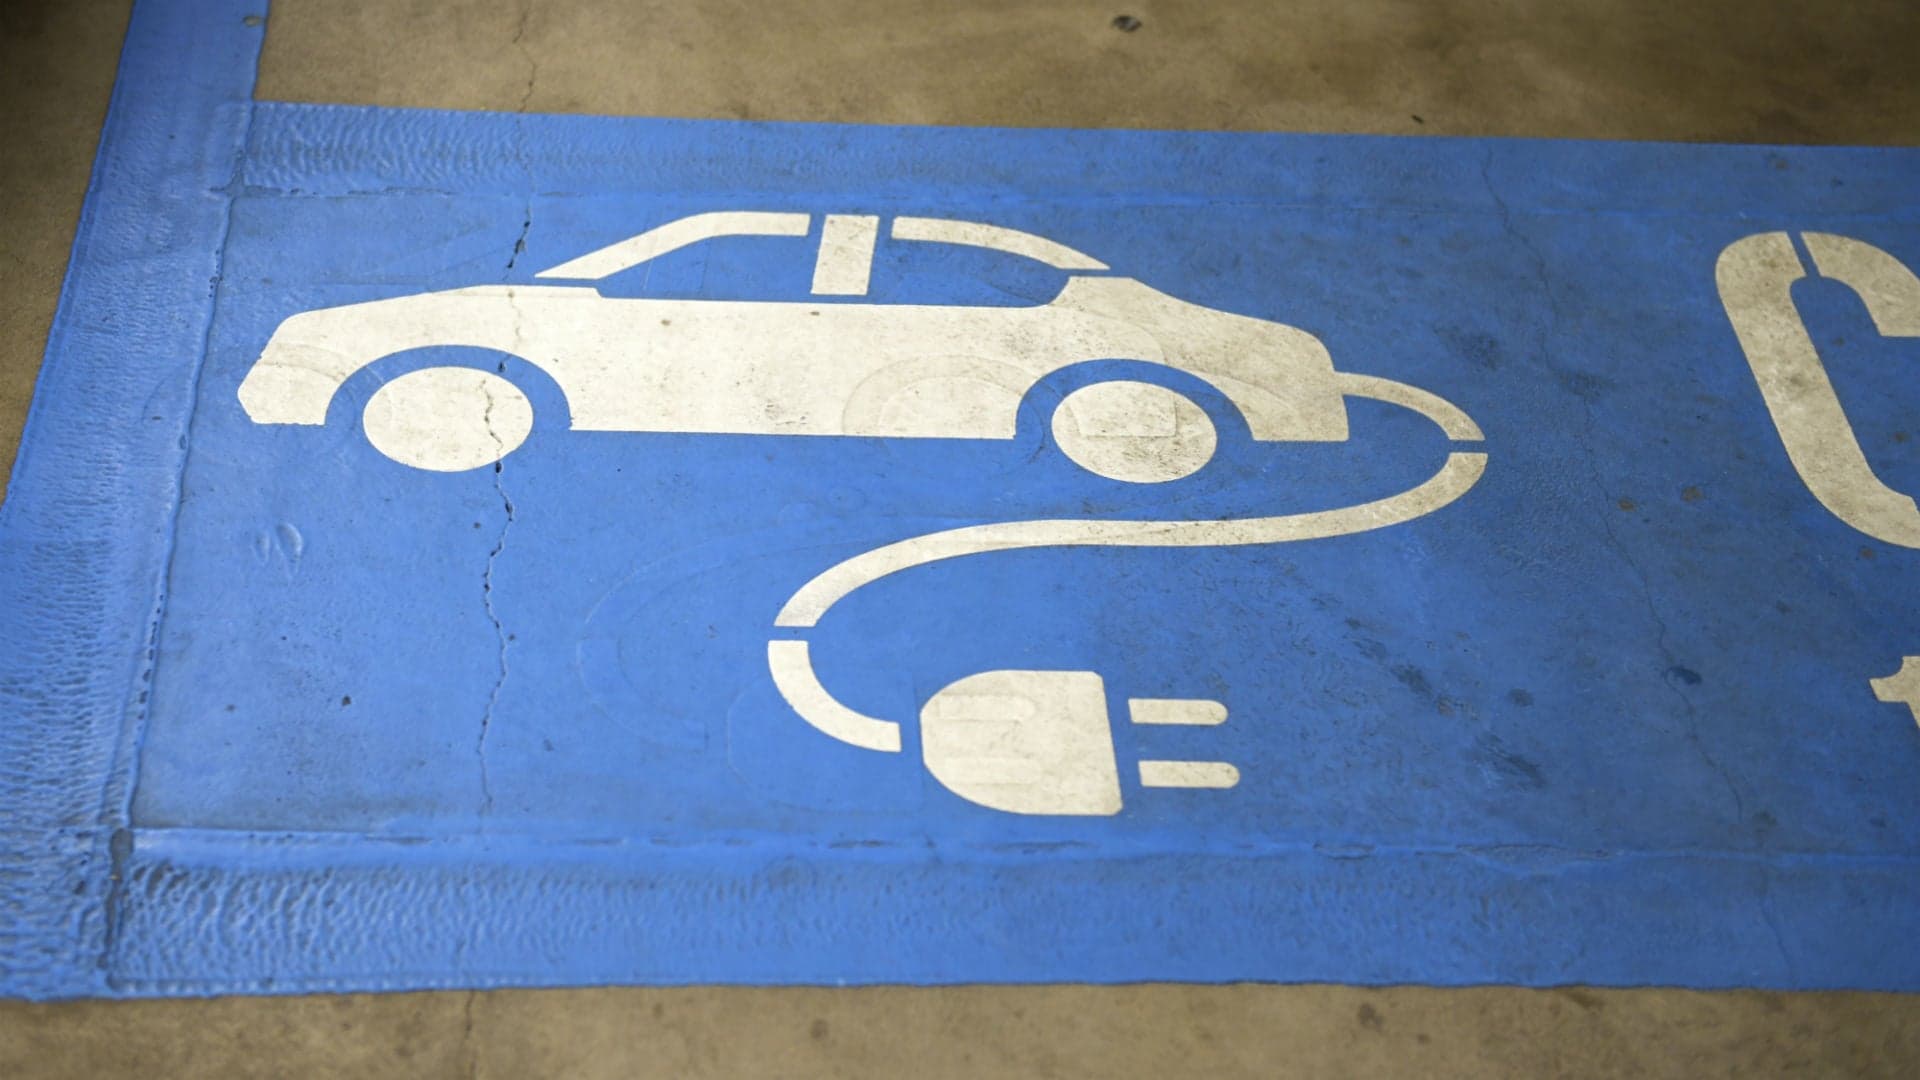 Australia Initiates Push for Electric Vehicles with Plans for Incentives, Cheaper Entry Points